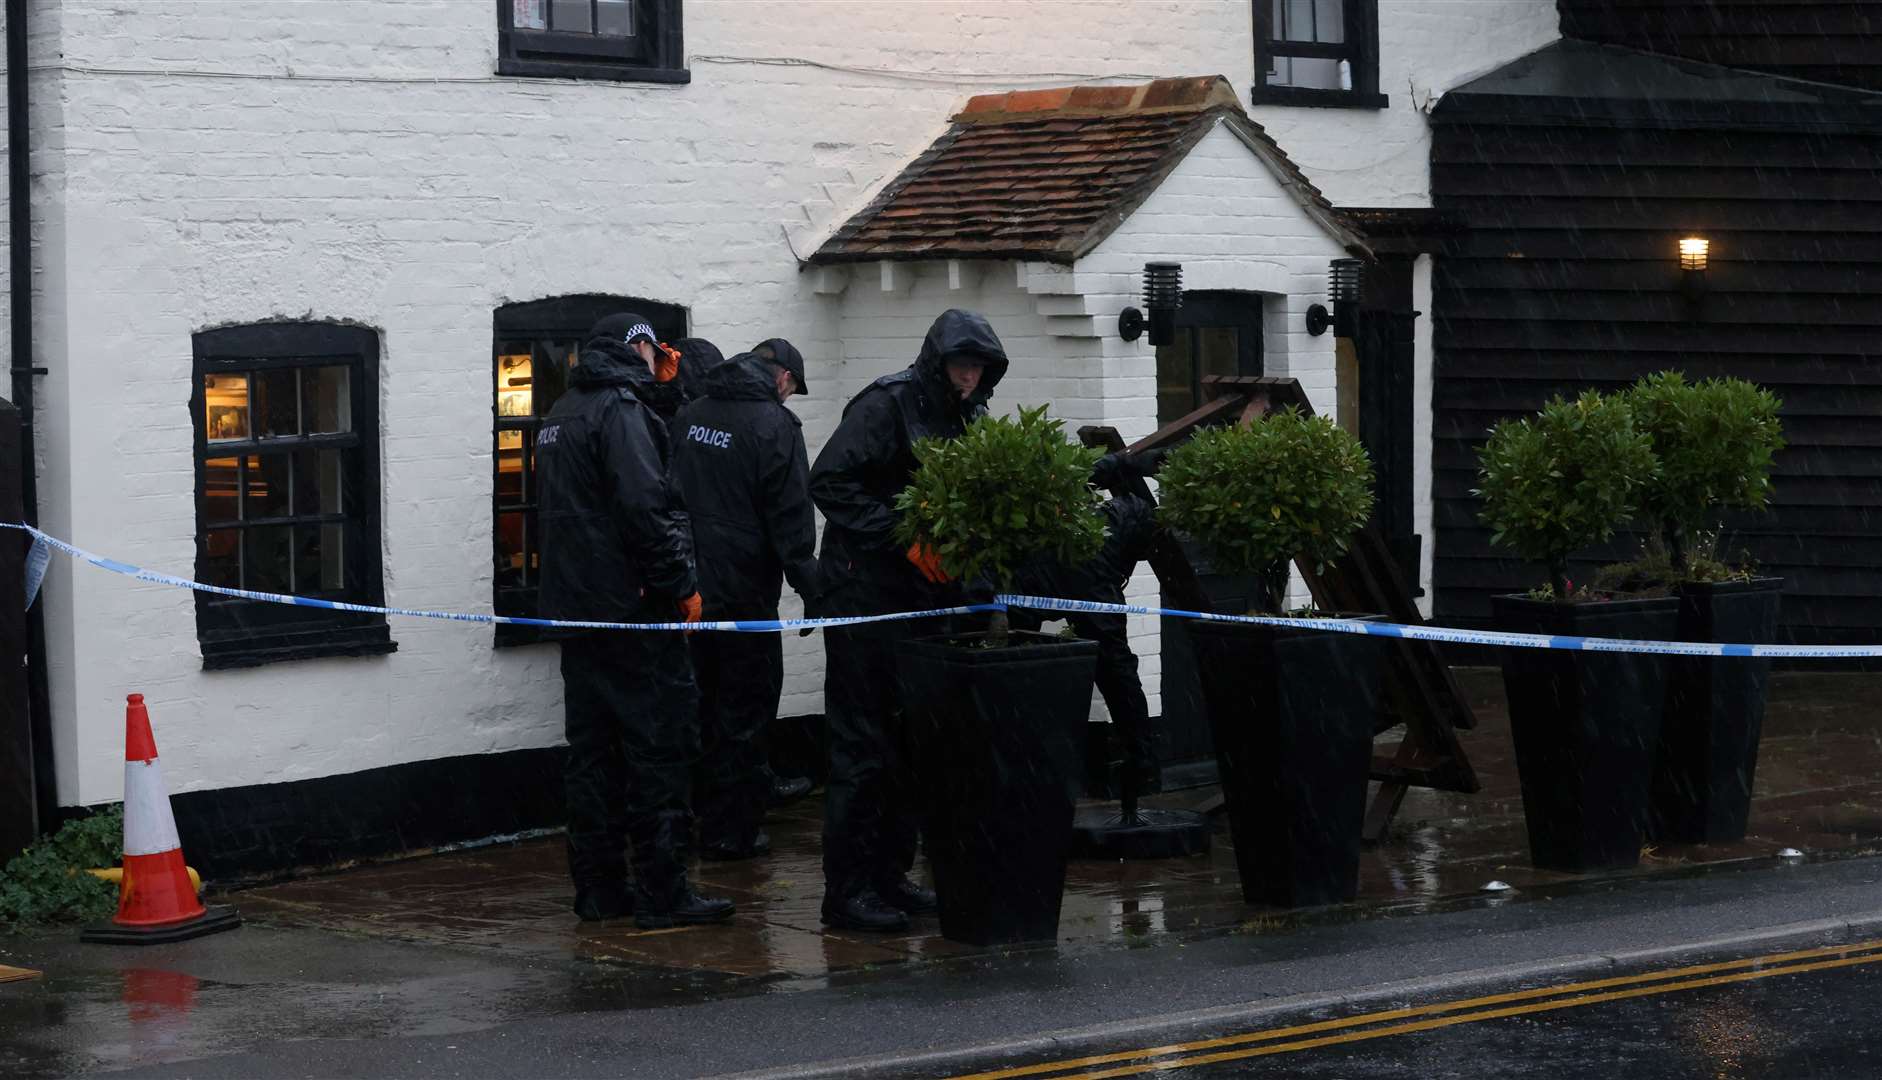 Batista has gone on trial accused of attempted murder after allegedly launching a ‘revenge attack’ on the landlord at the Cricketers in Meopham. Picture: UKNIP